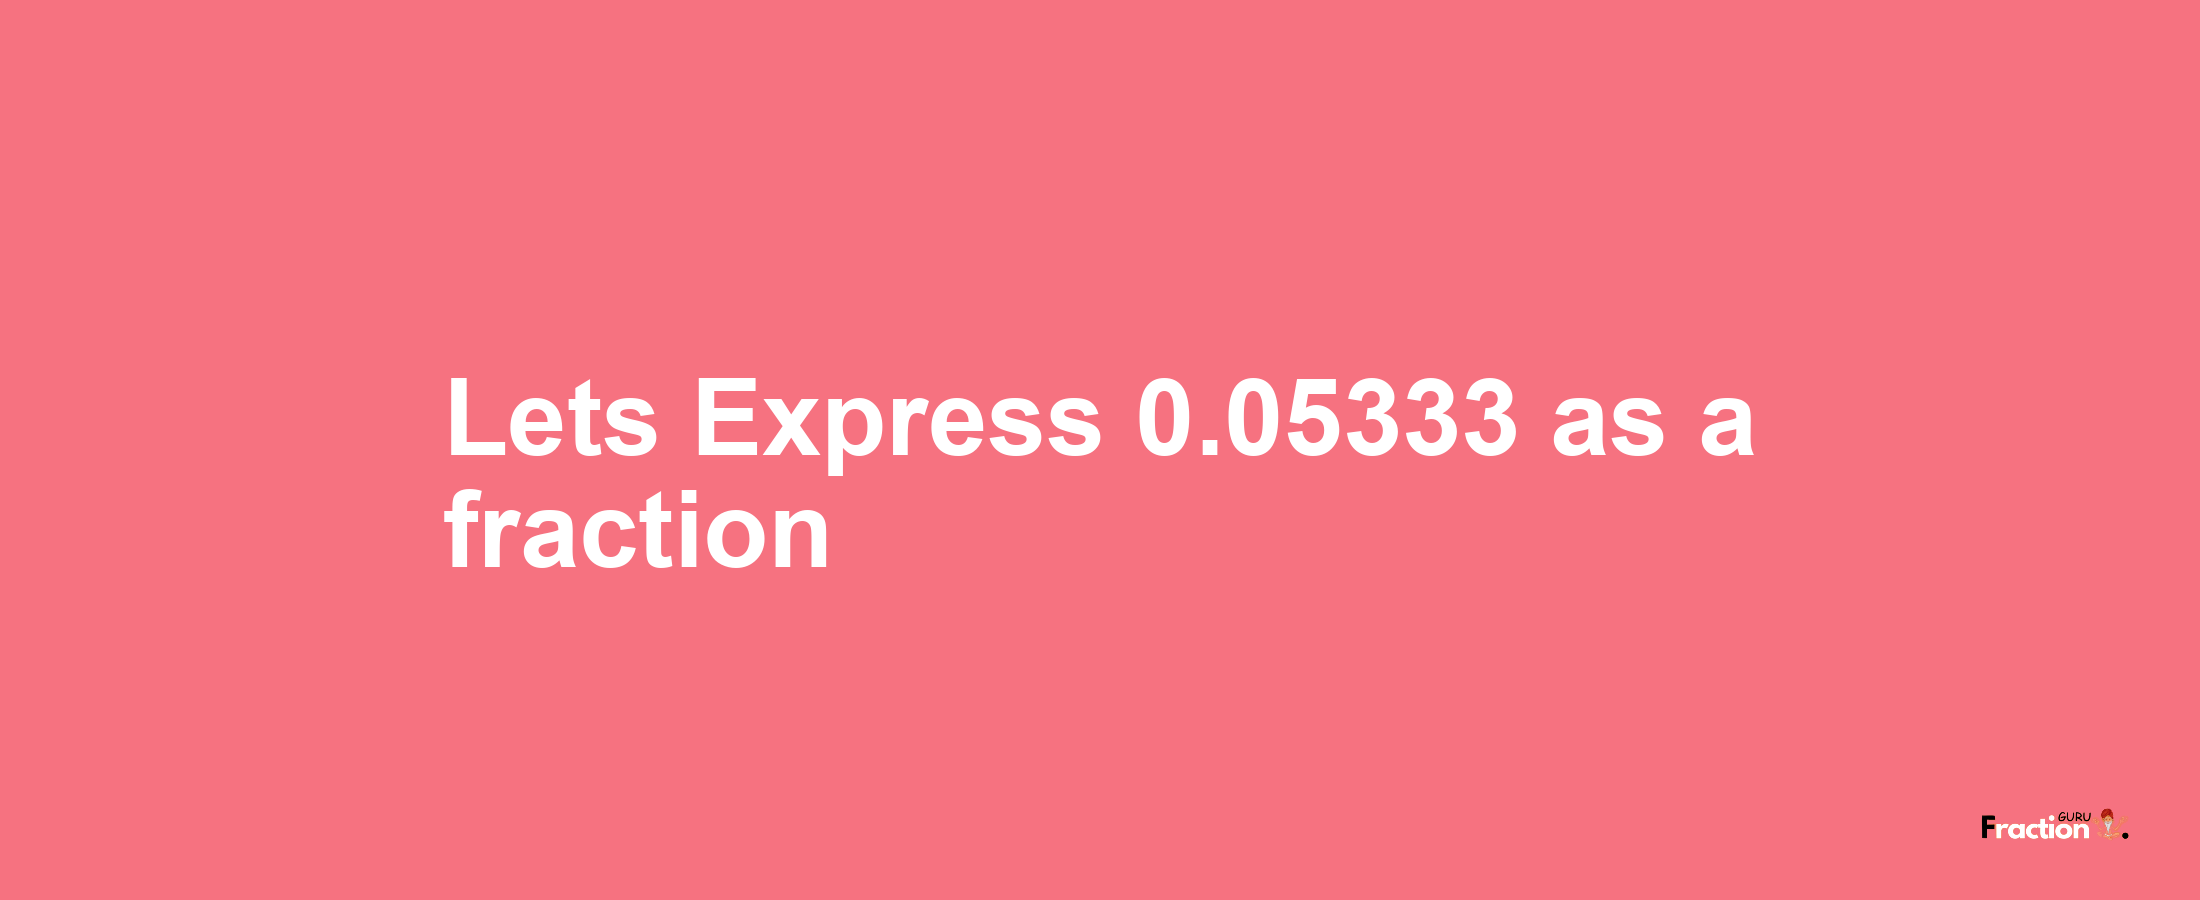 Lets Express 0.05333 as afraction